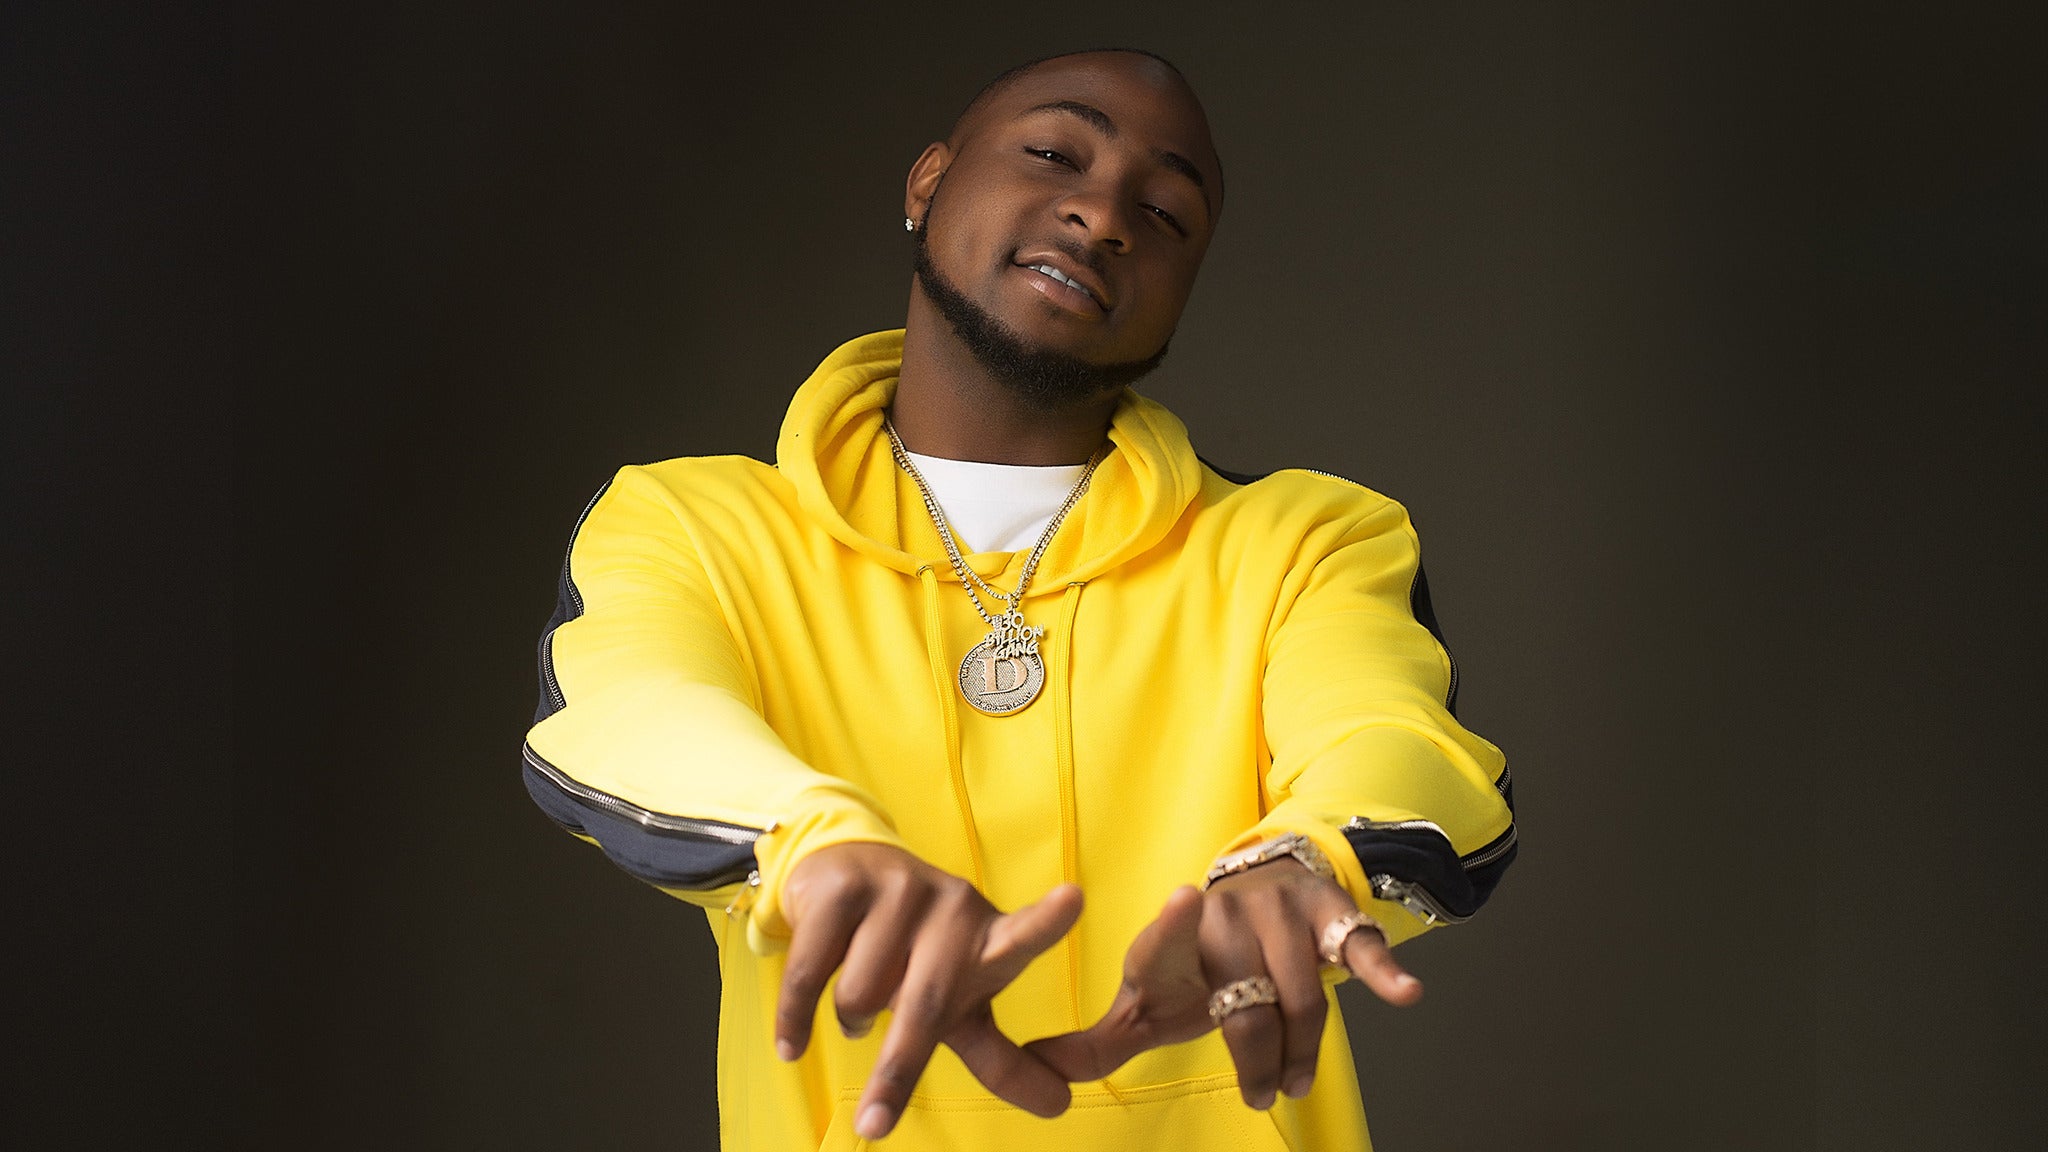 DaVido- A Good Time Tour in Vancouver promo photo for VIP Tour Package presale offer code